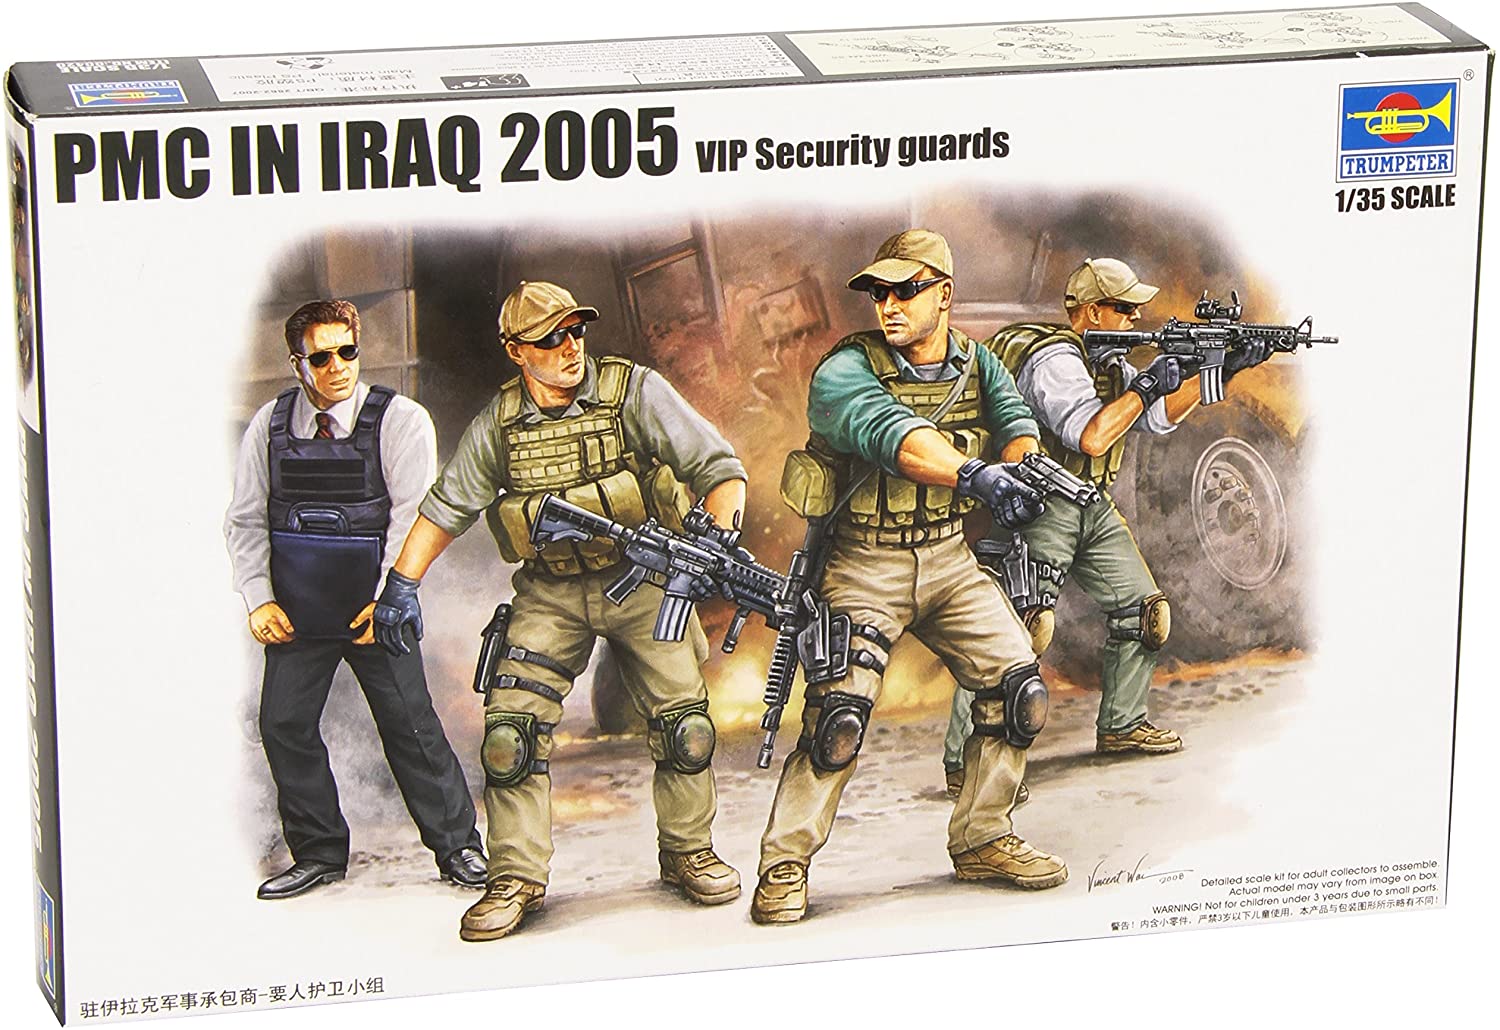 00420 - Trumpeter Private Military Company VIP Security Guards in Iraq 2005 (4 Figures)